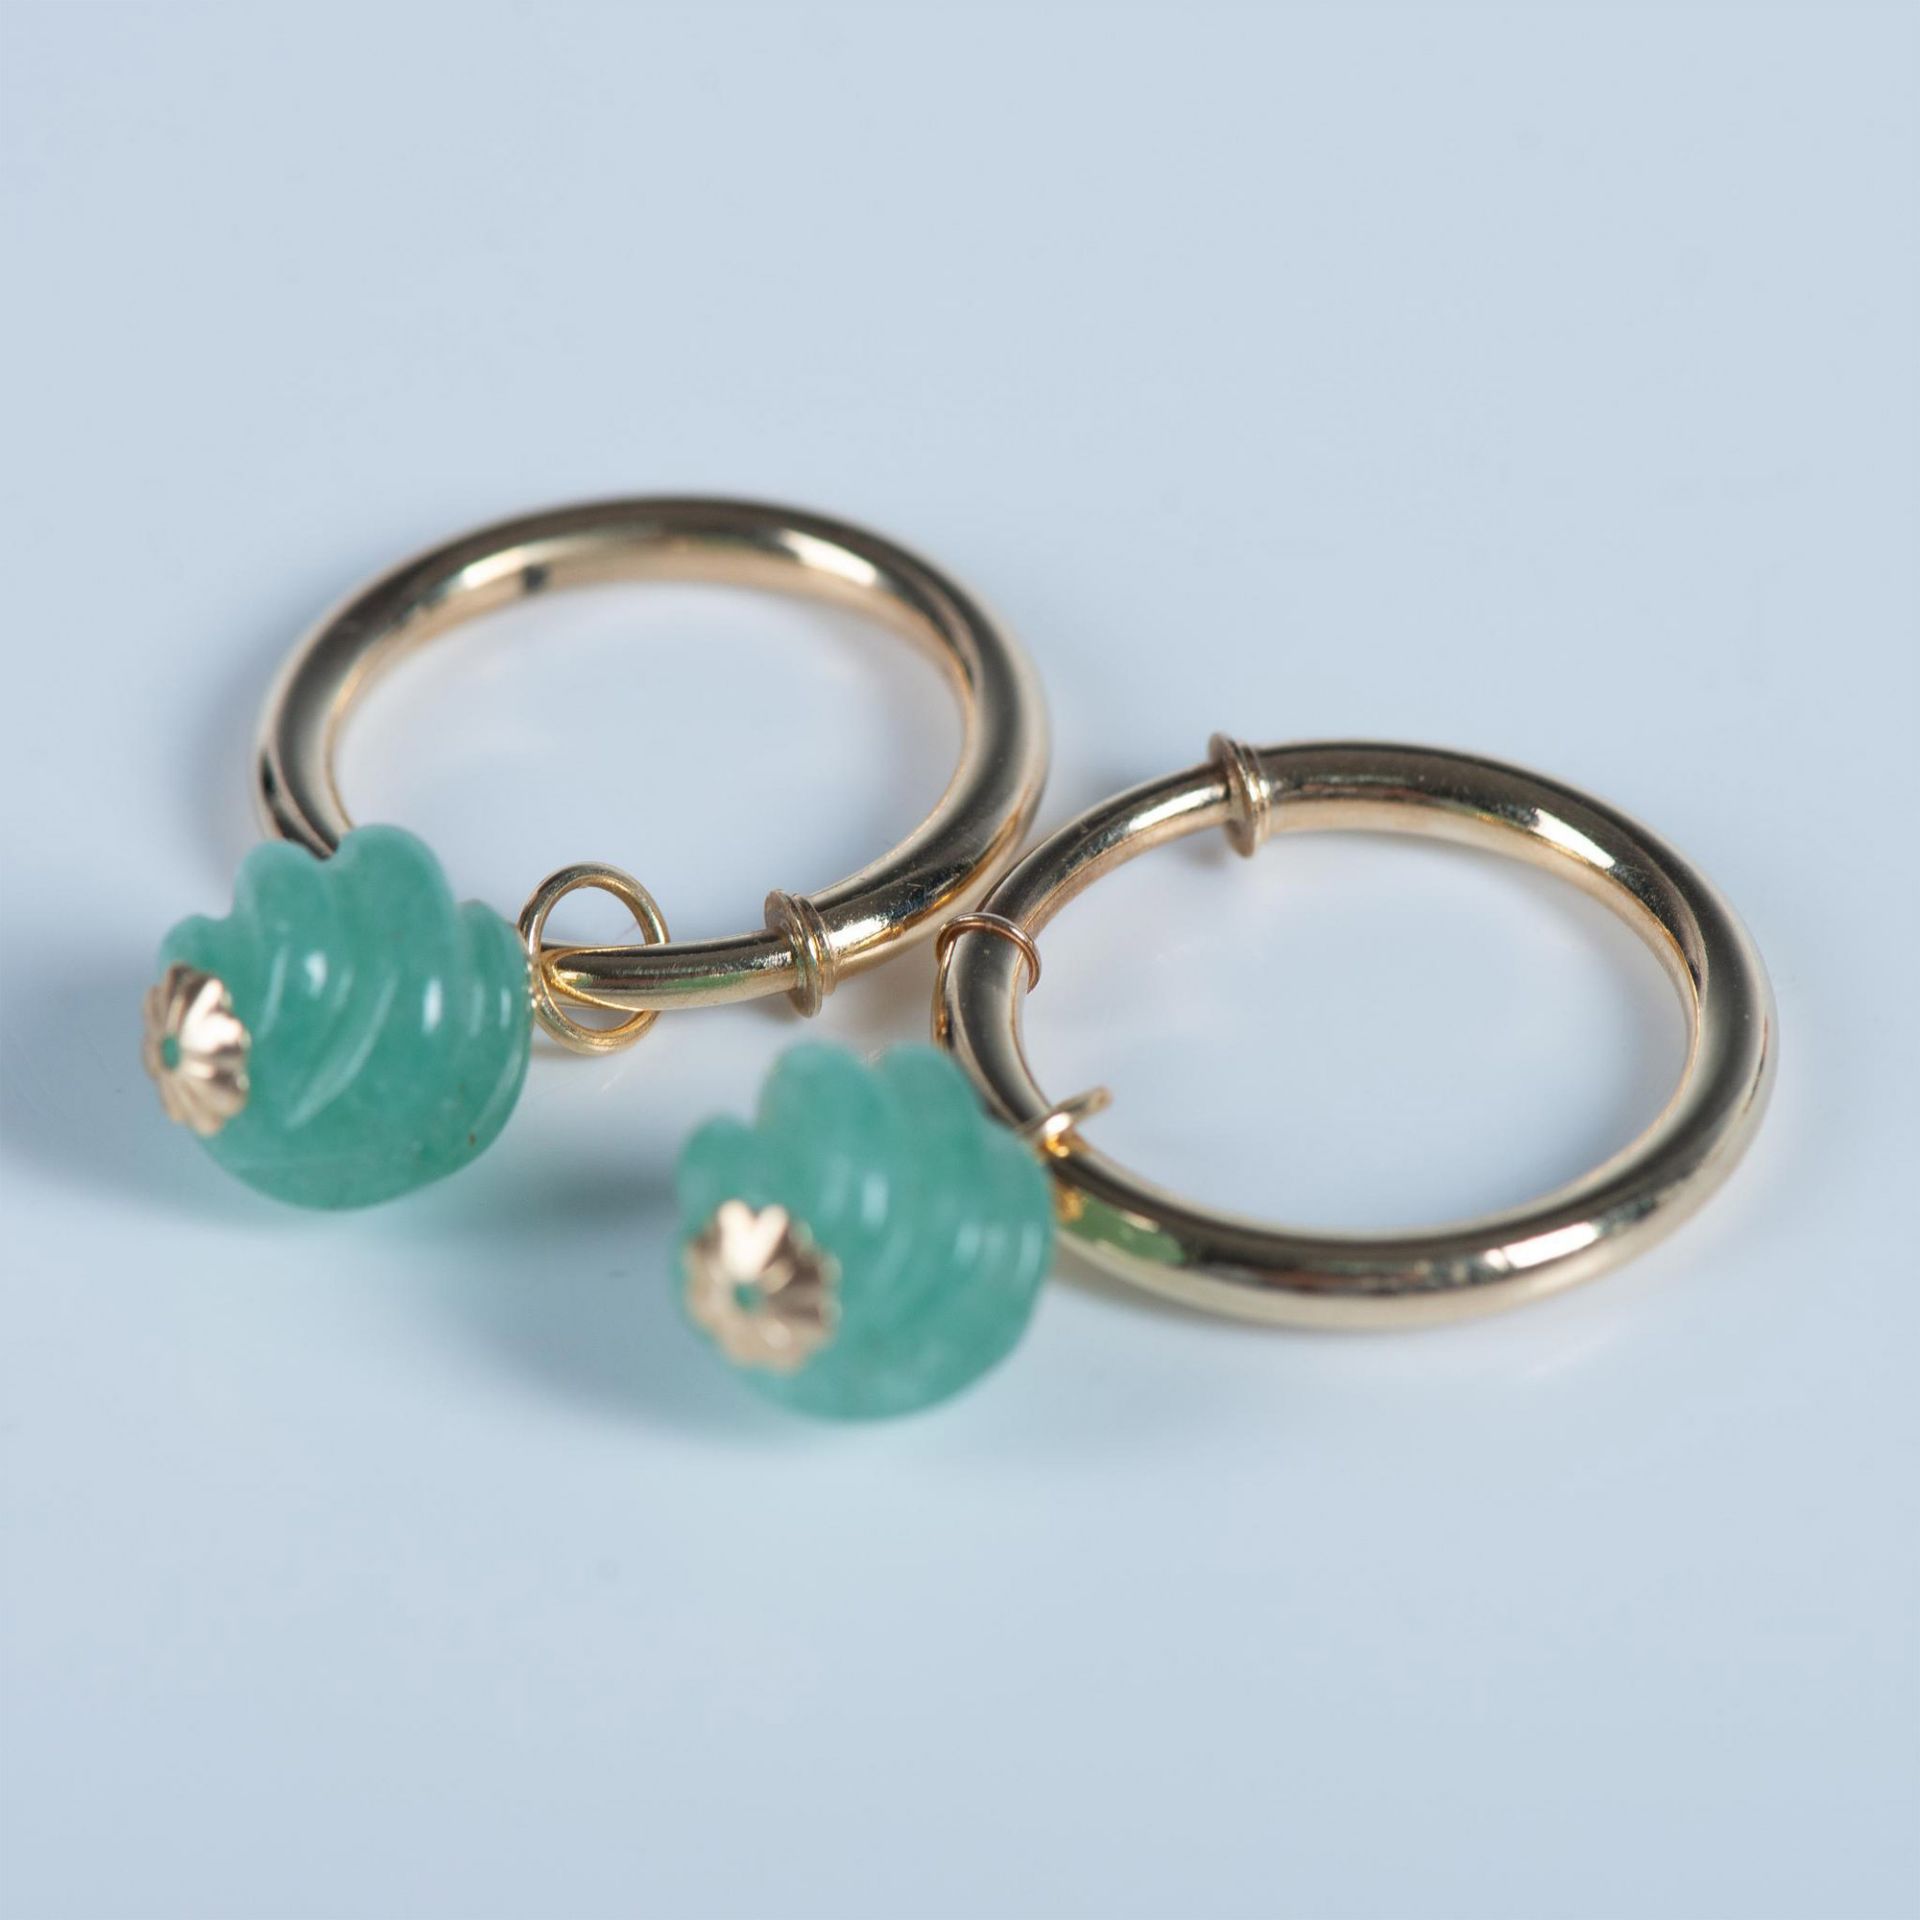 12pc Gold Hoop Earrings and Gemstone Charms - Image 2 of 6